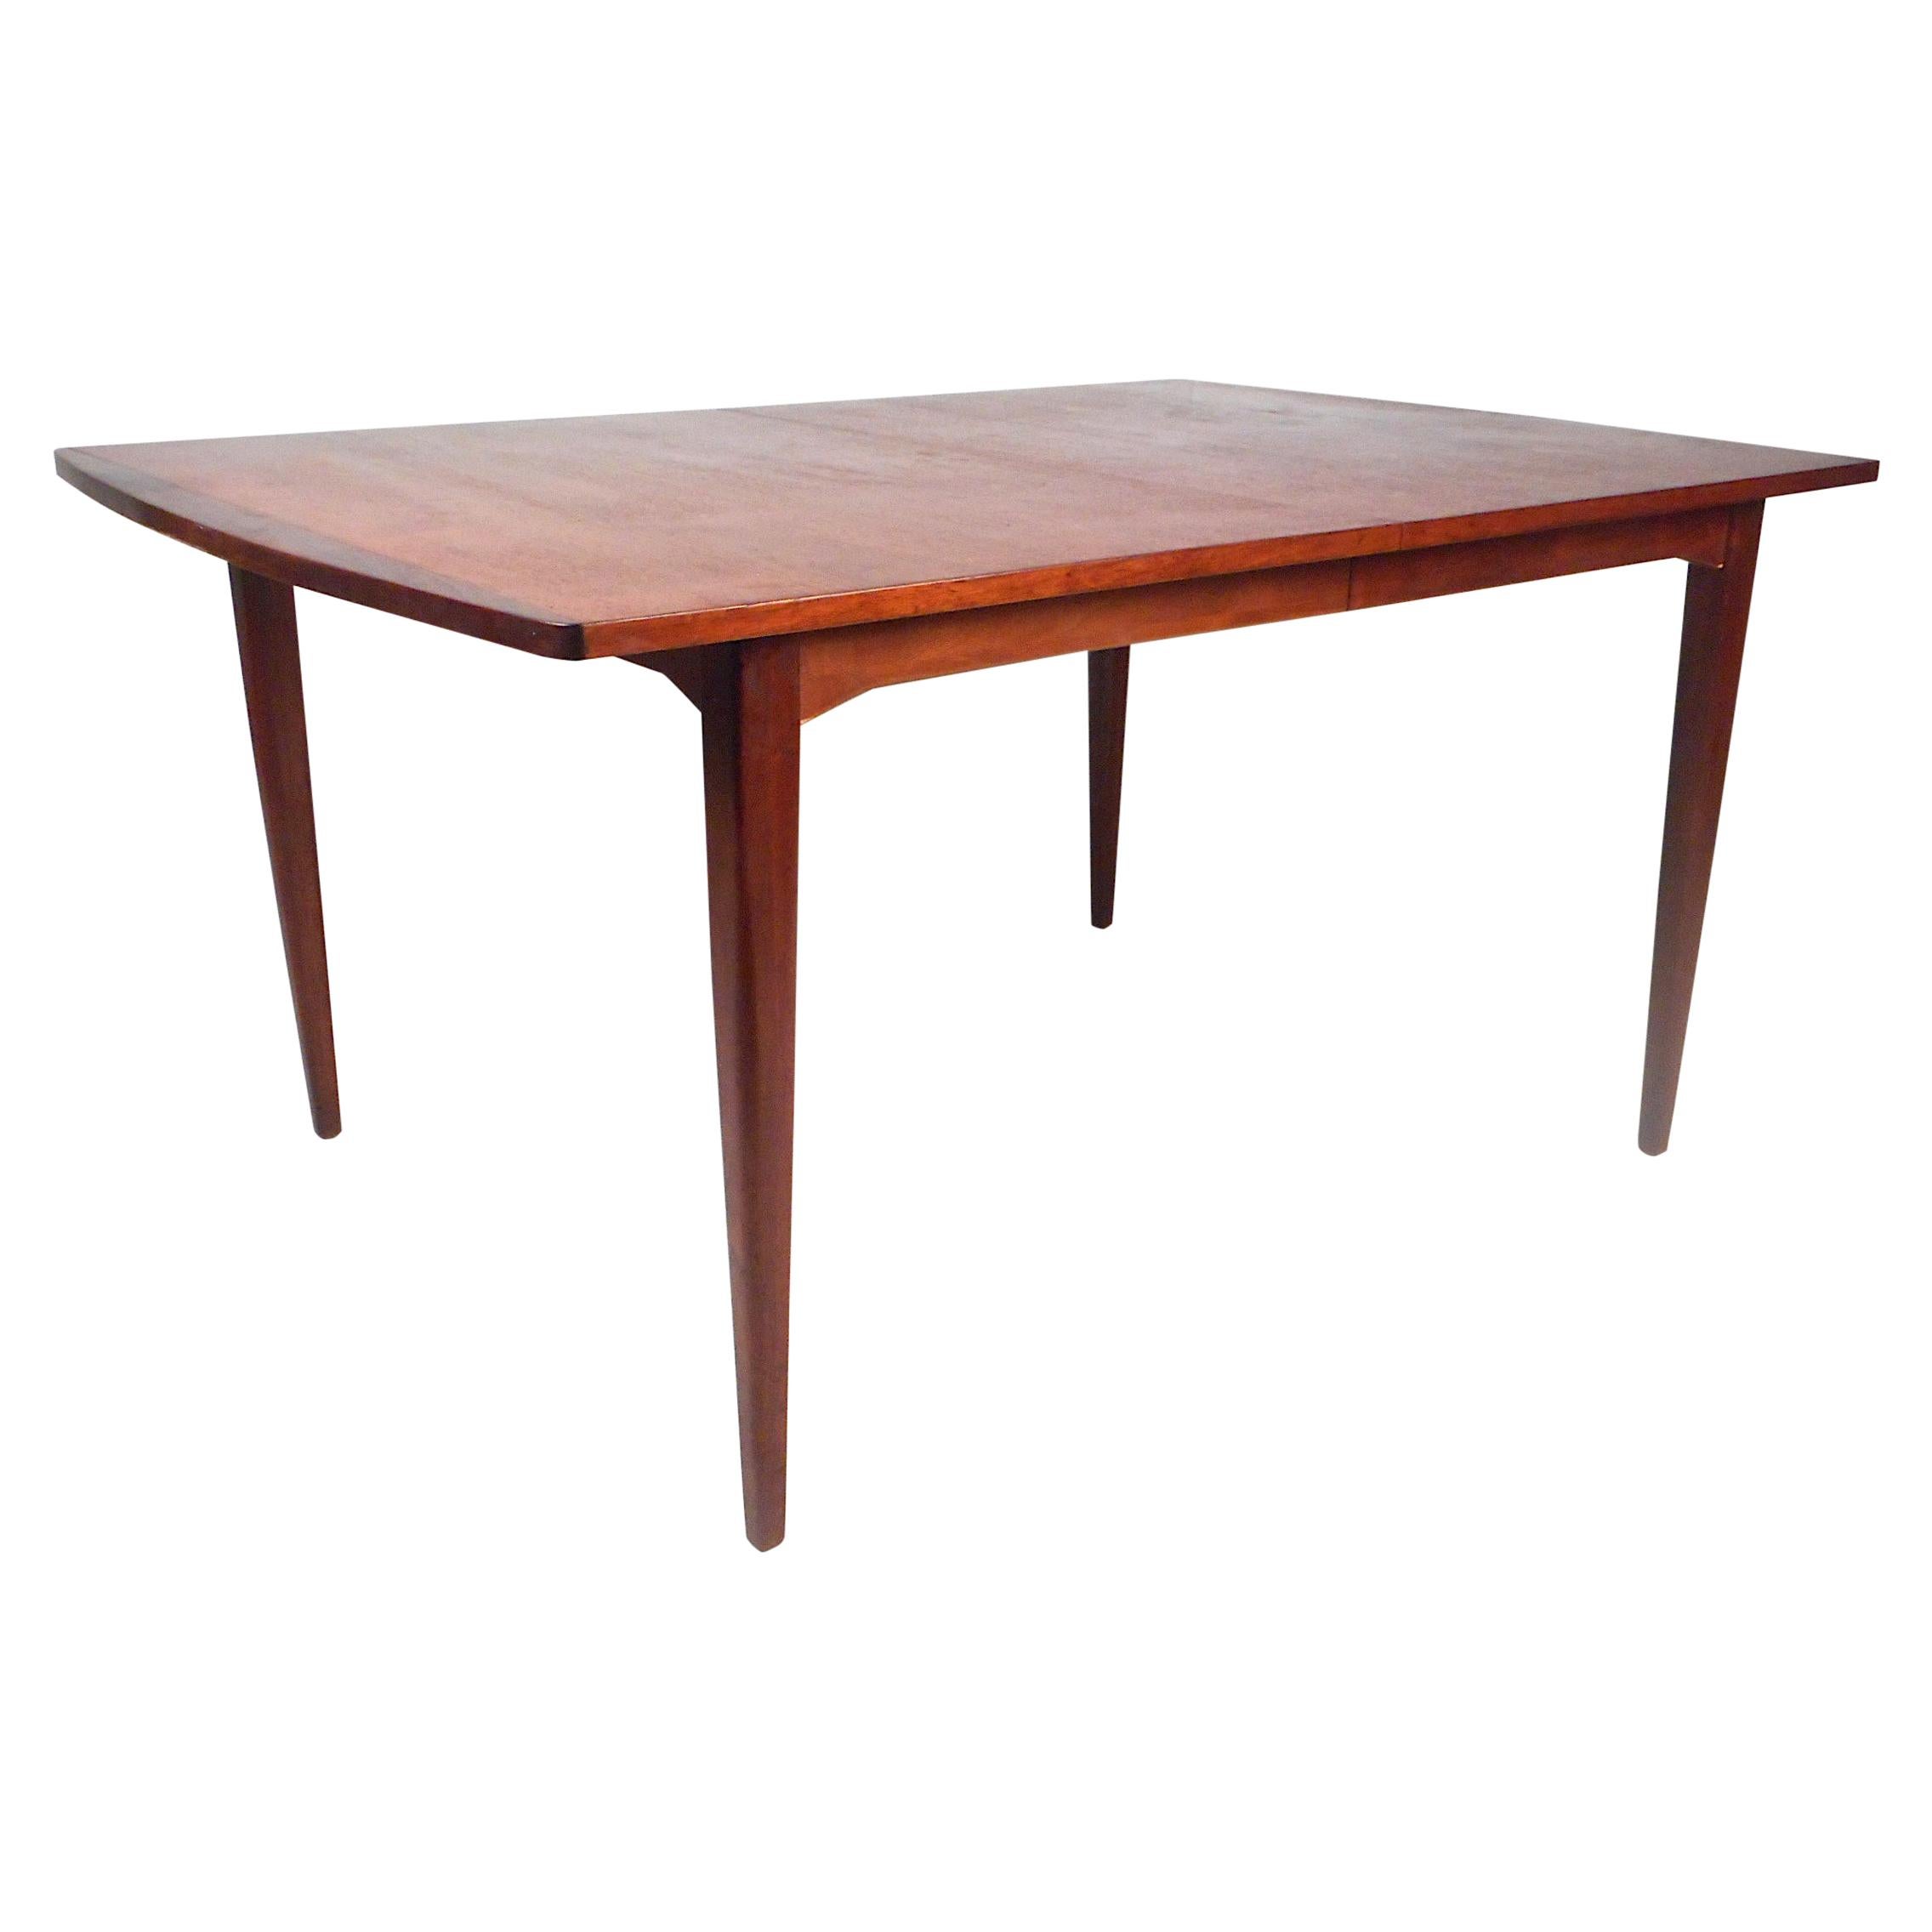 Midcentury Dining Table by Drexel